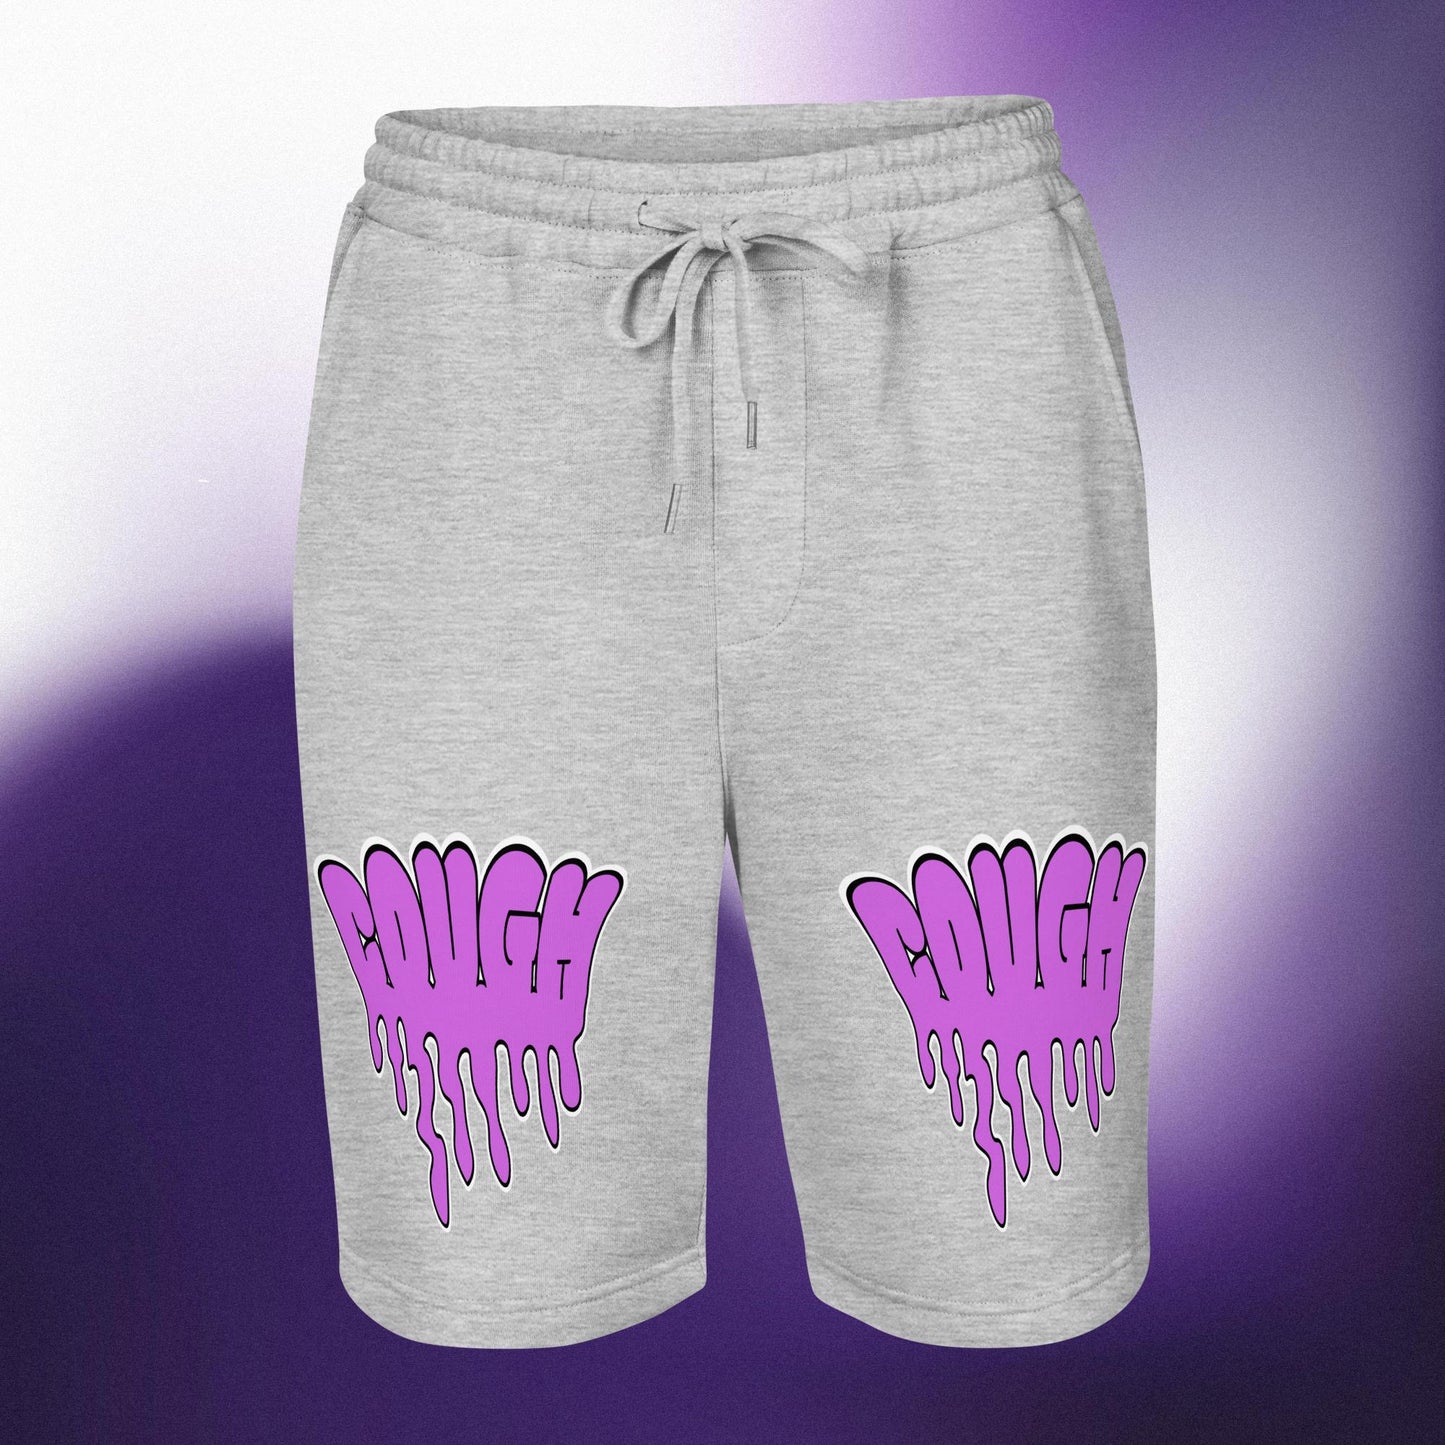 THE "COUGH COUTURE" SHORTS